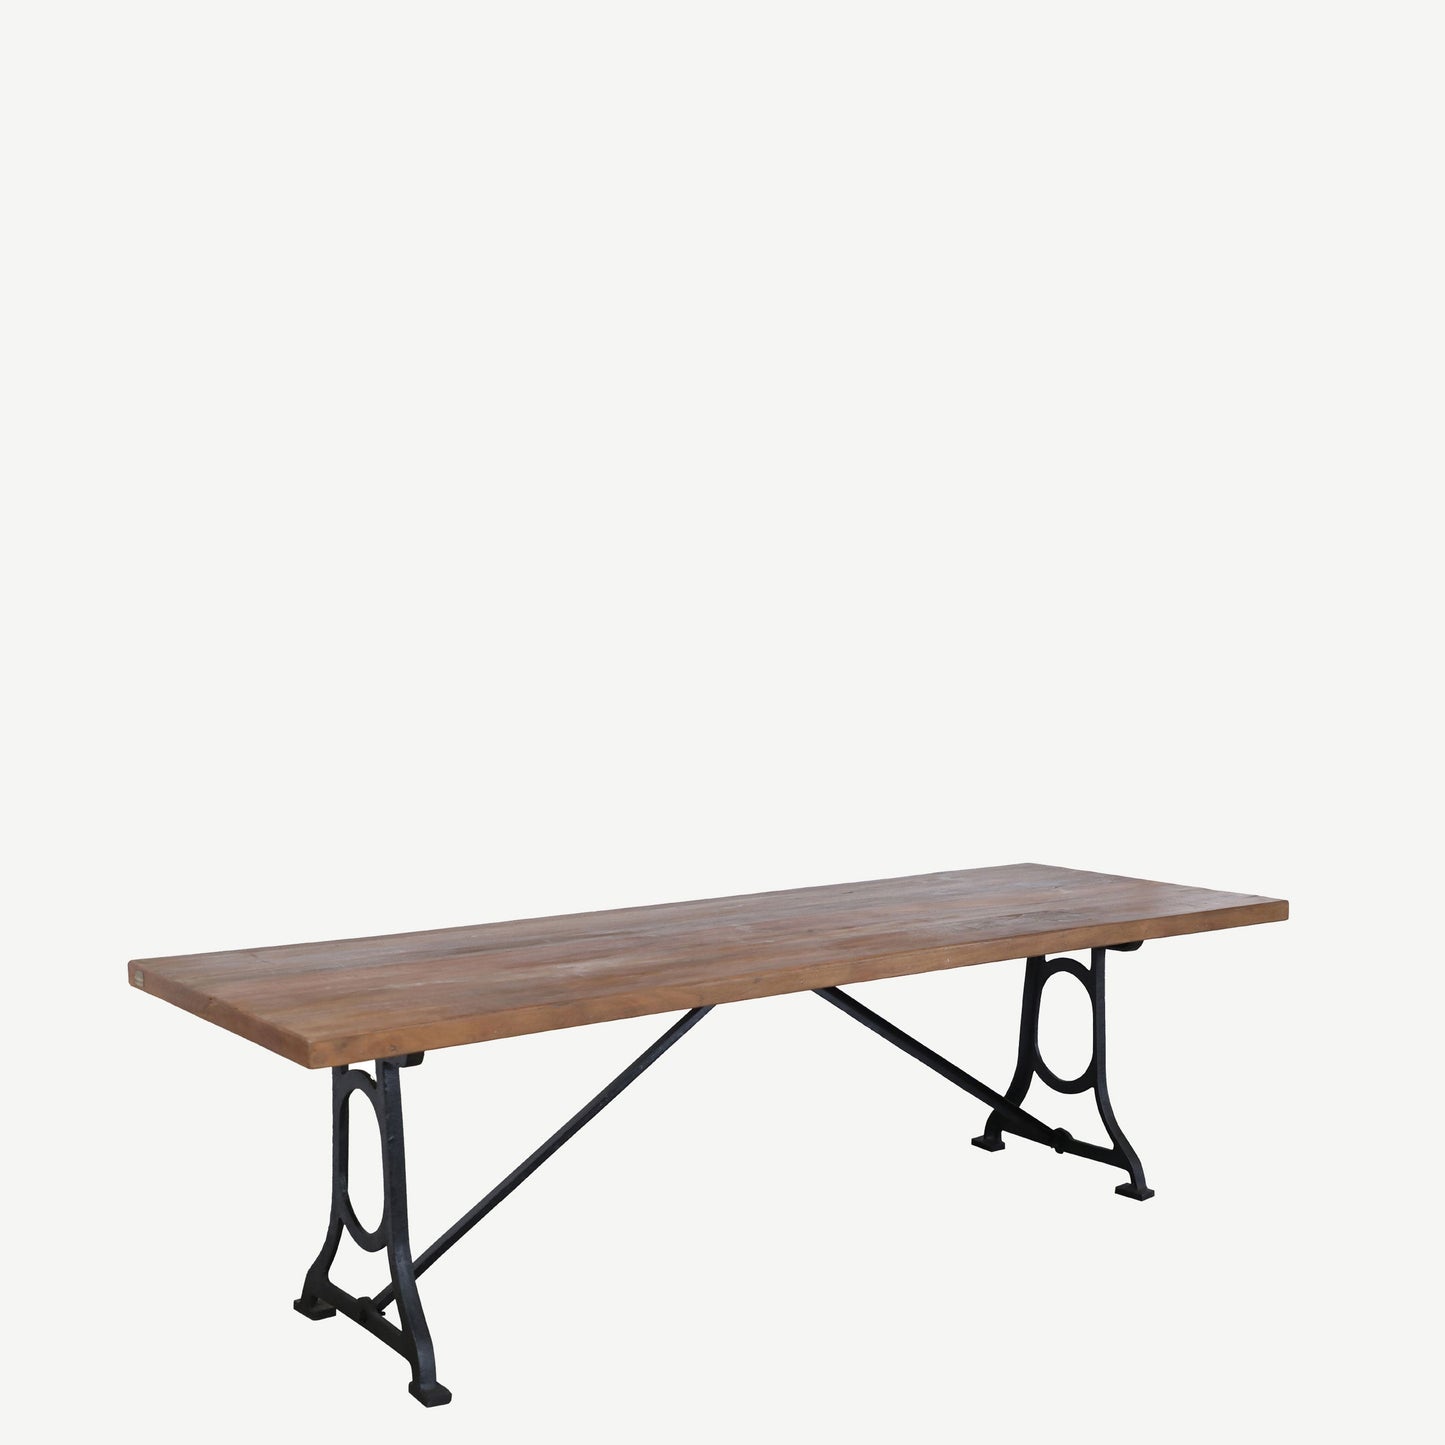 The Daley Antique Teak and Iron Long  Table